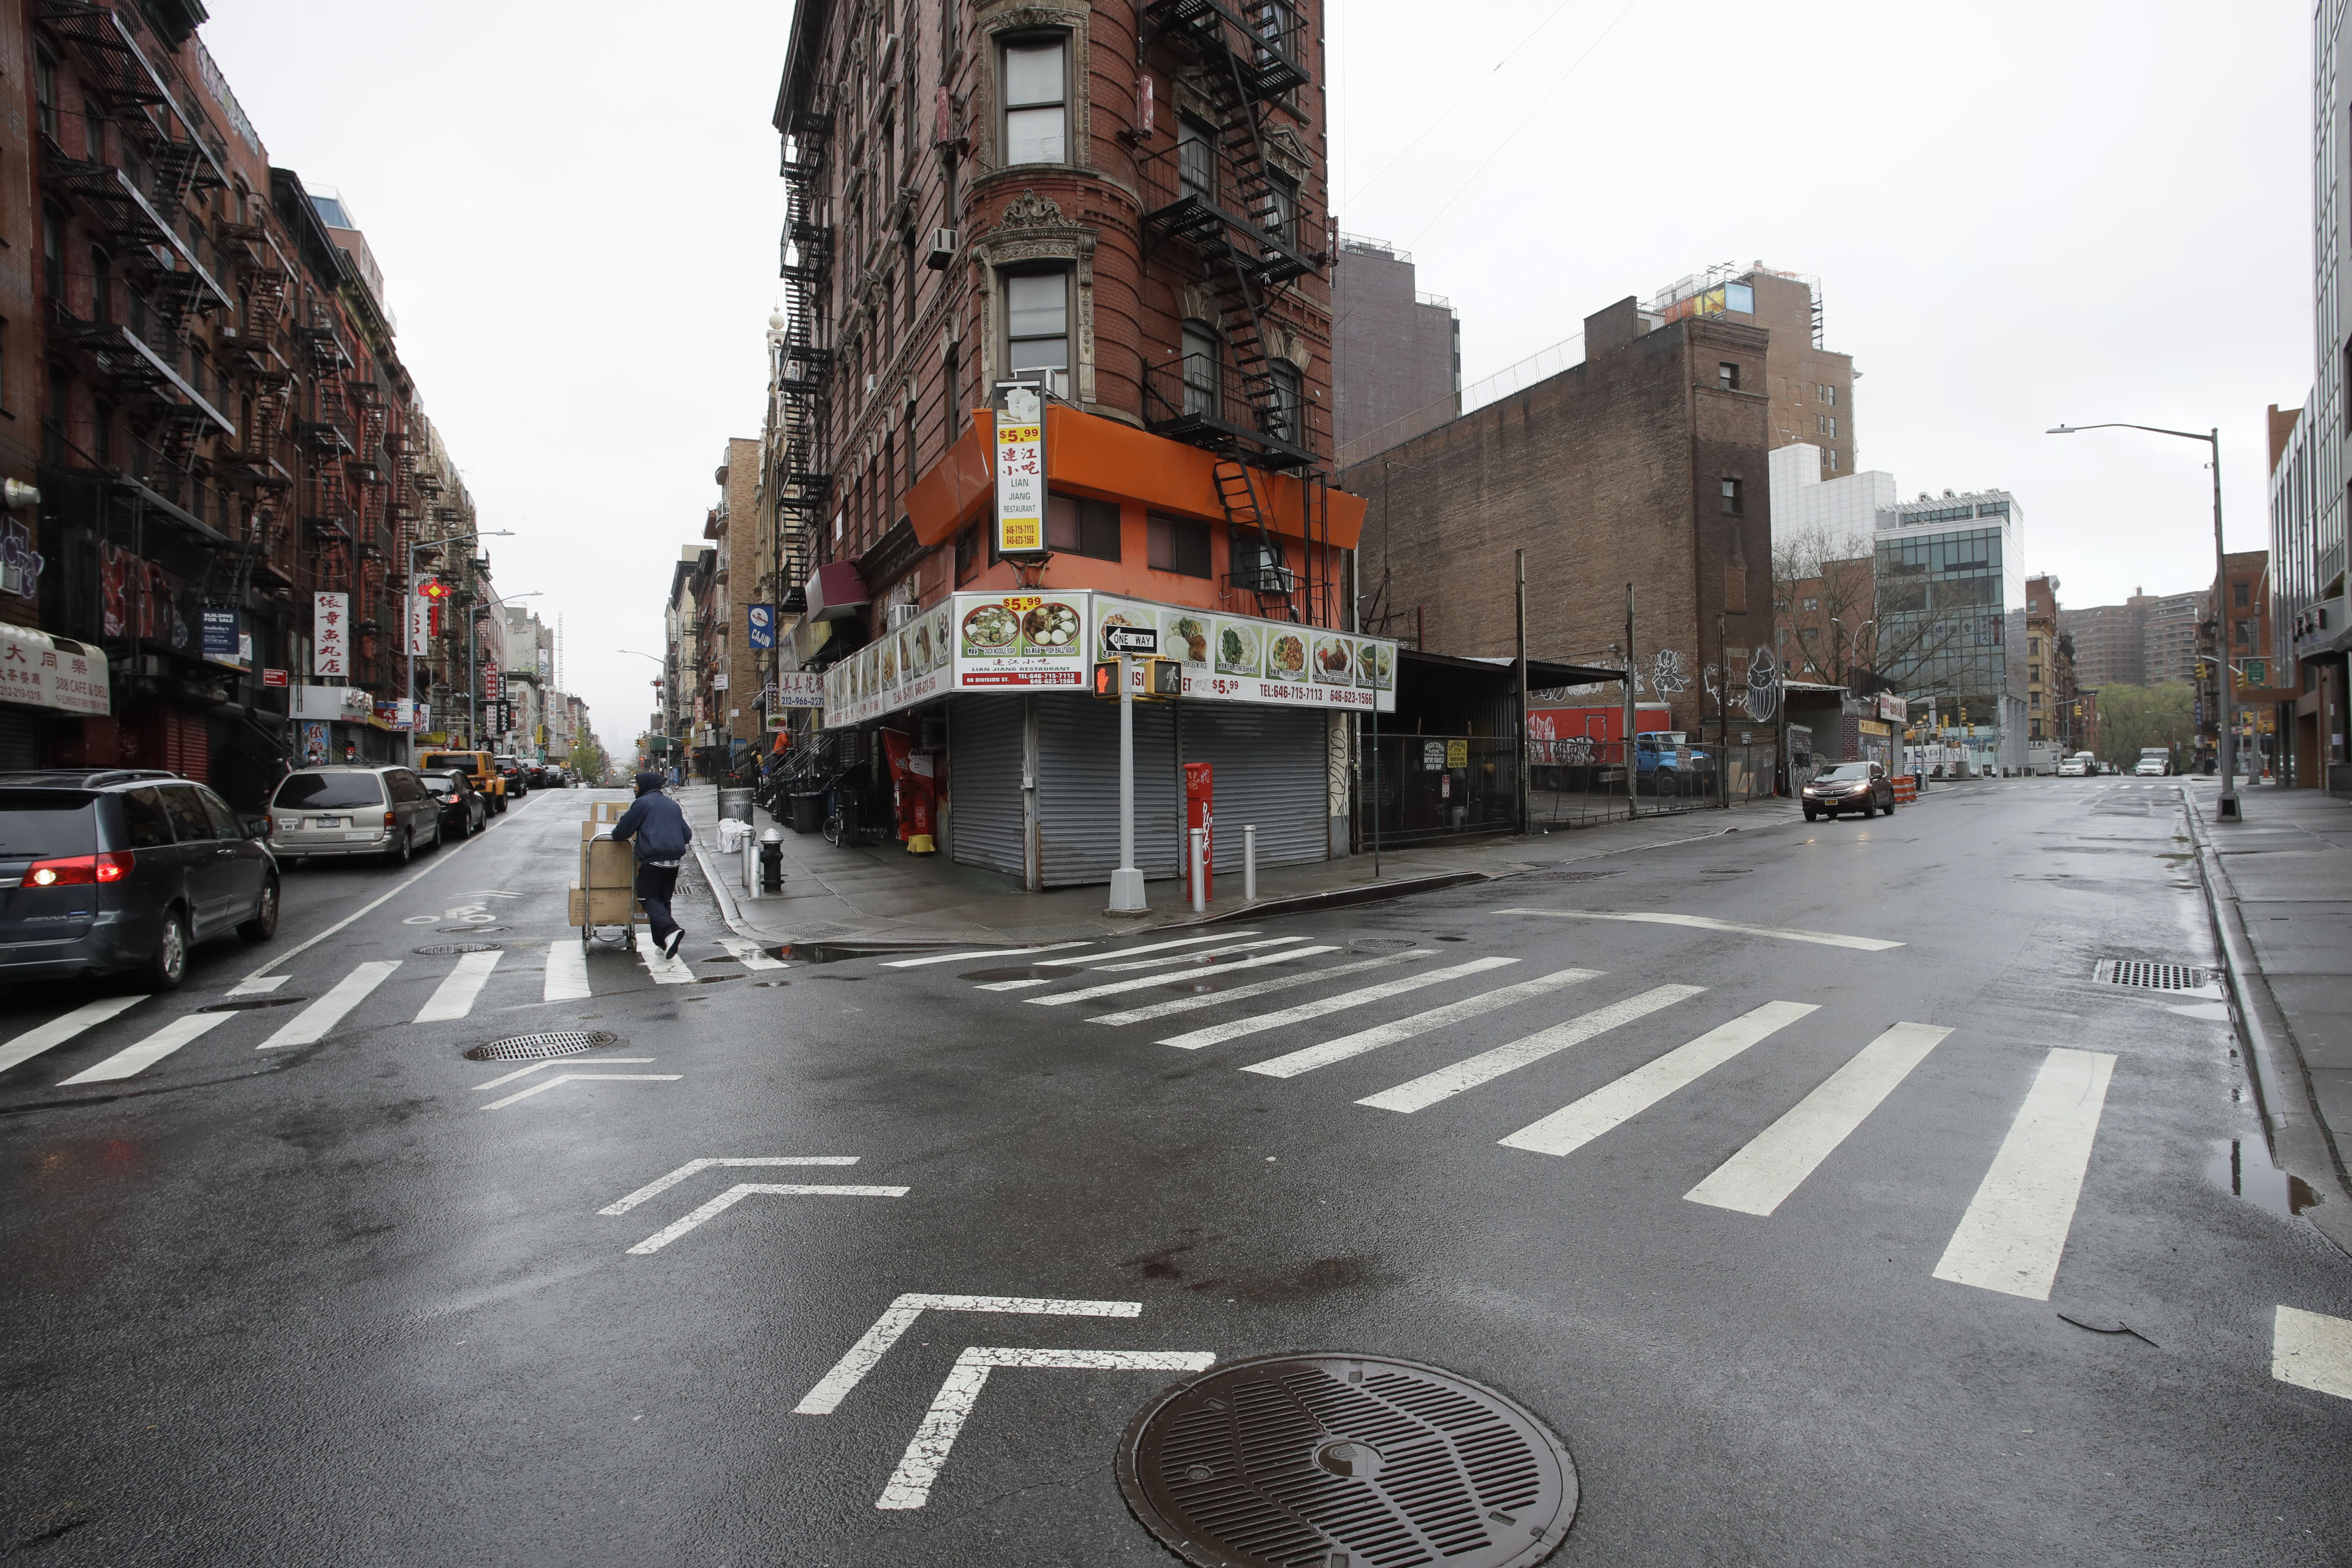 A man pushes a cart of boxes through the intersection of Eldridge St. and Division Street, Monday, April 13, 2020 in New York's Chinatown during the coronavirus pandemic. The streets are normally bustling with vehicles and pedestrians. (AP Photo/Mark Lennihan)